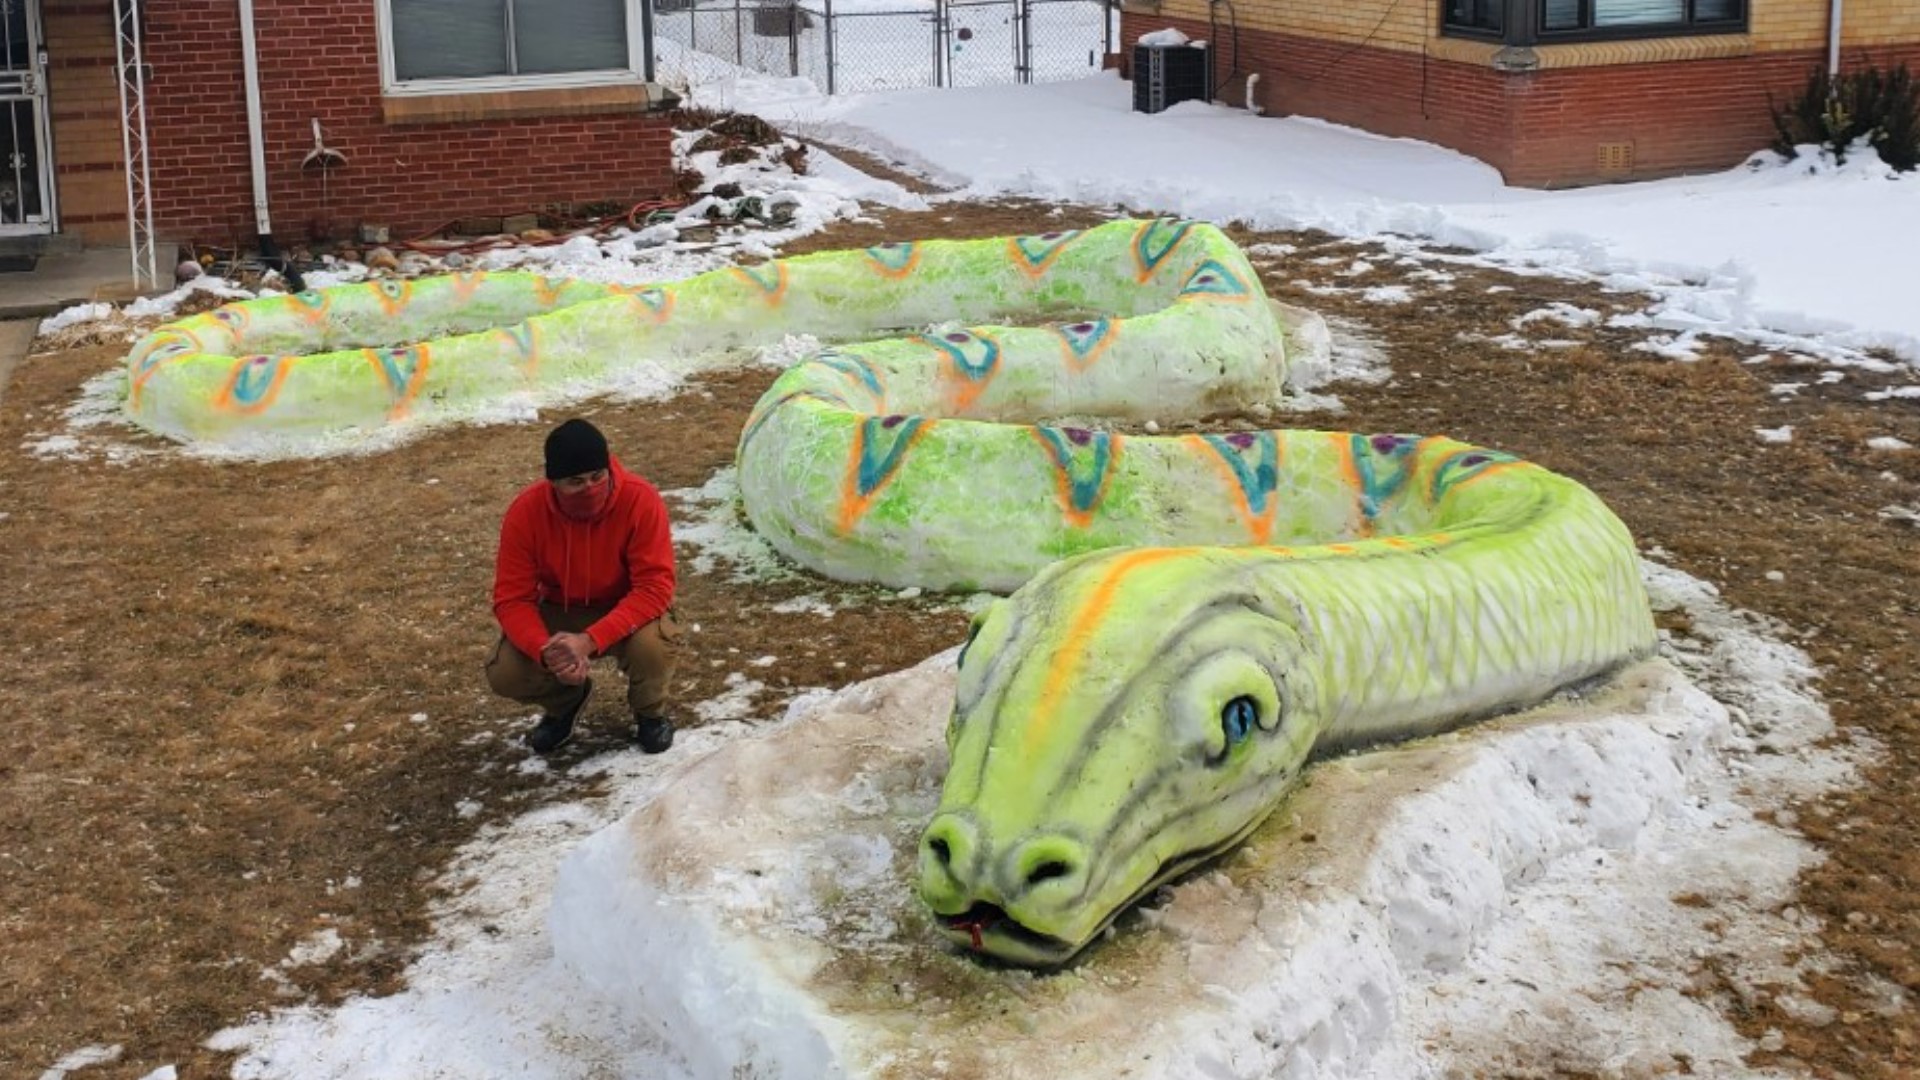 Morn Mosley and his siblings built a huge snake out of snow in Denver’s Park Hill neighborhood over the weekend.